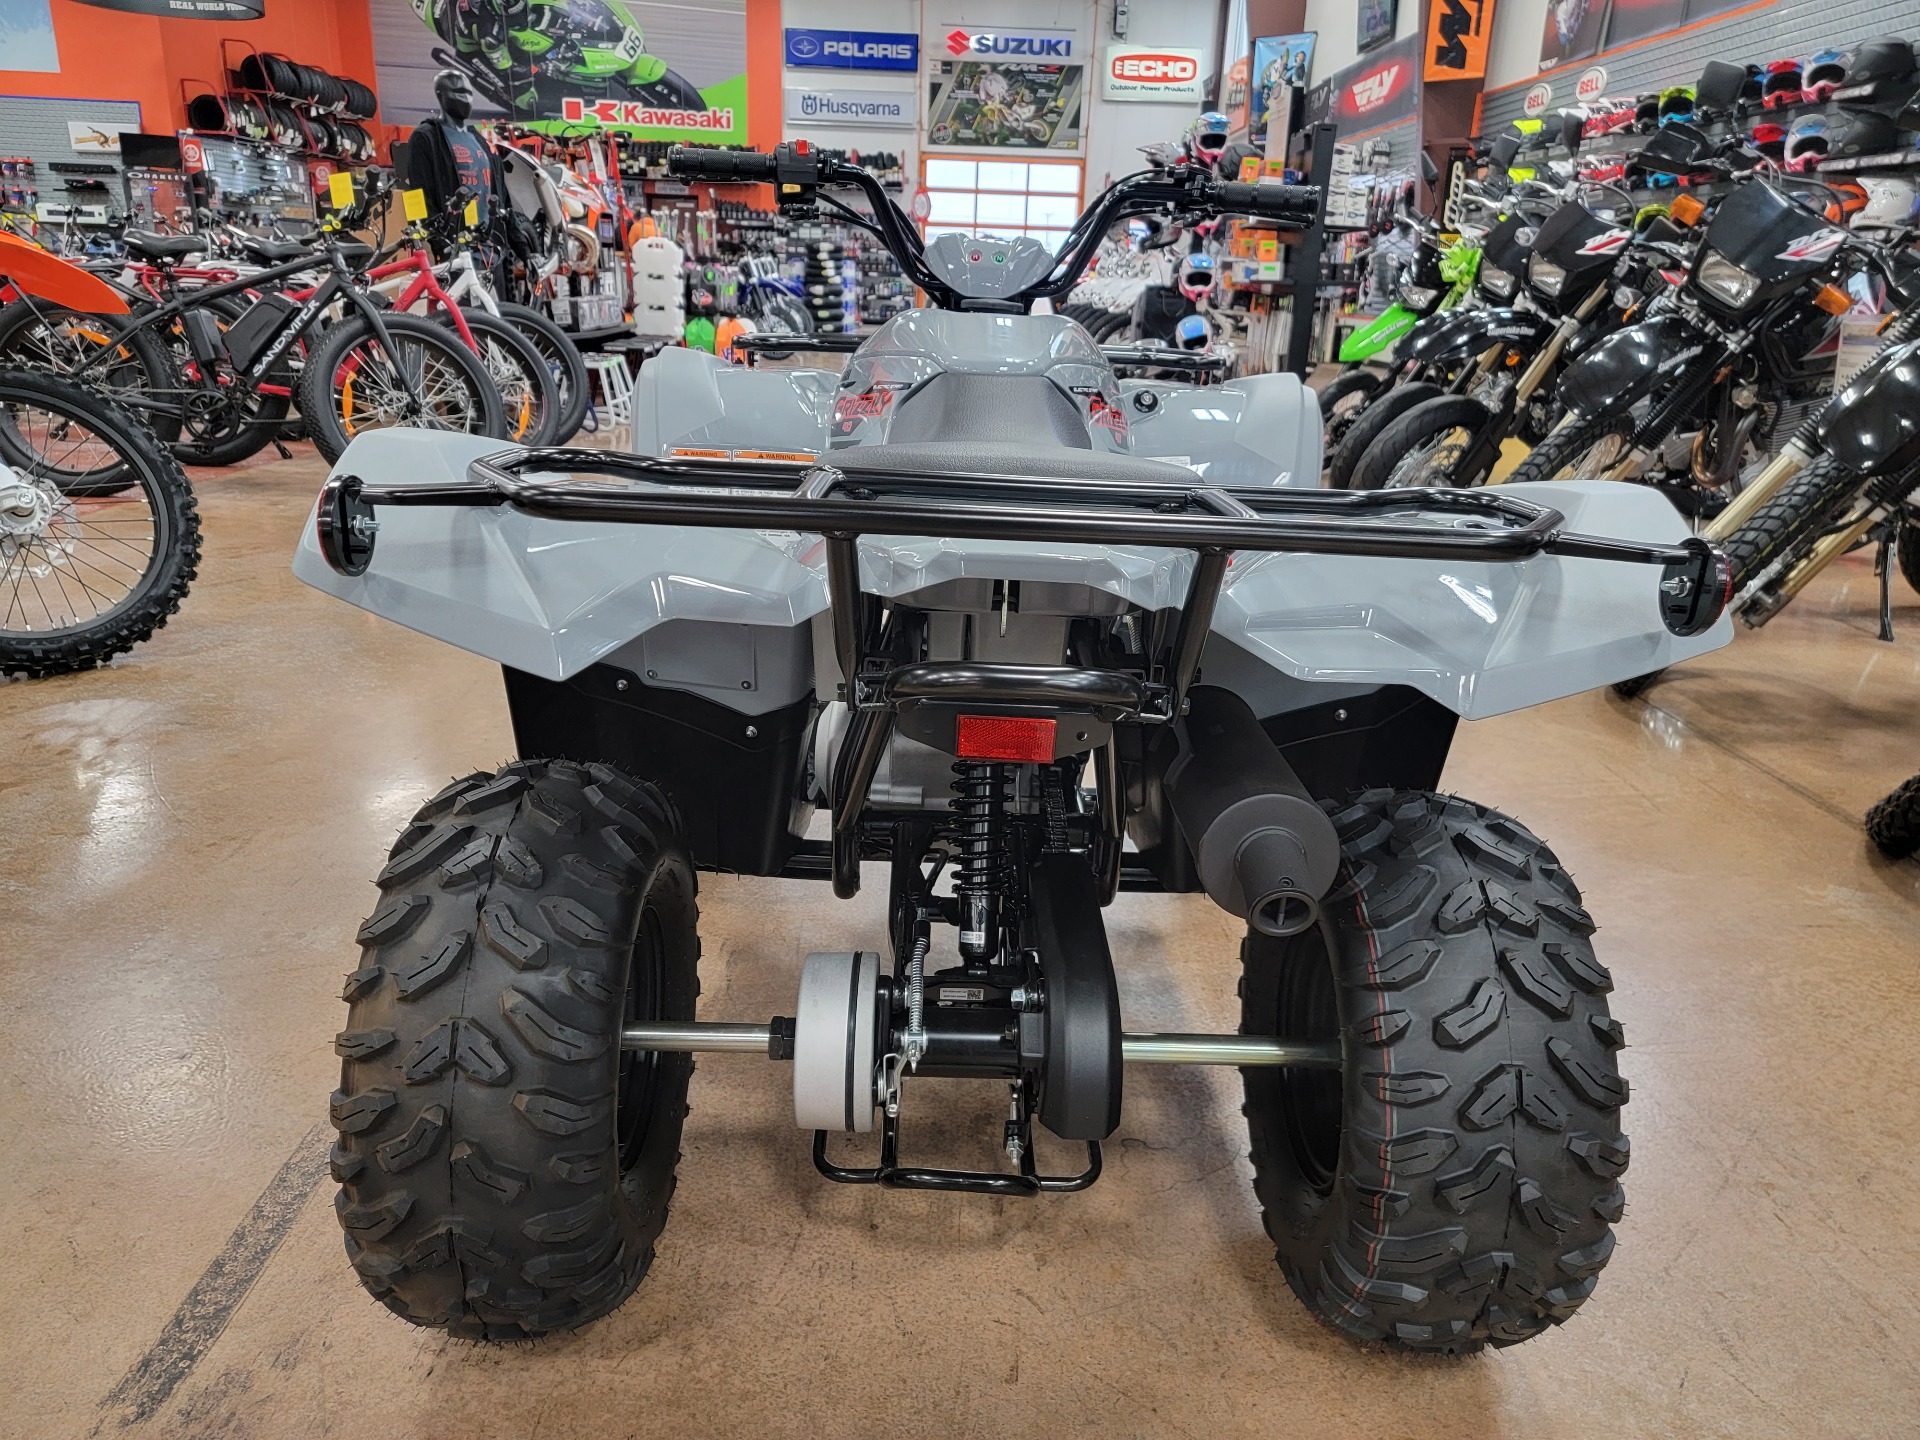 2022 Yamaha Grizzly 90 in Evansville, Indiana - Photo 6